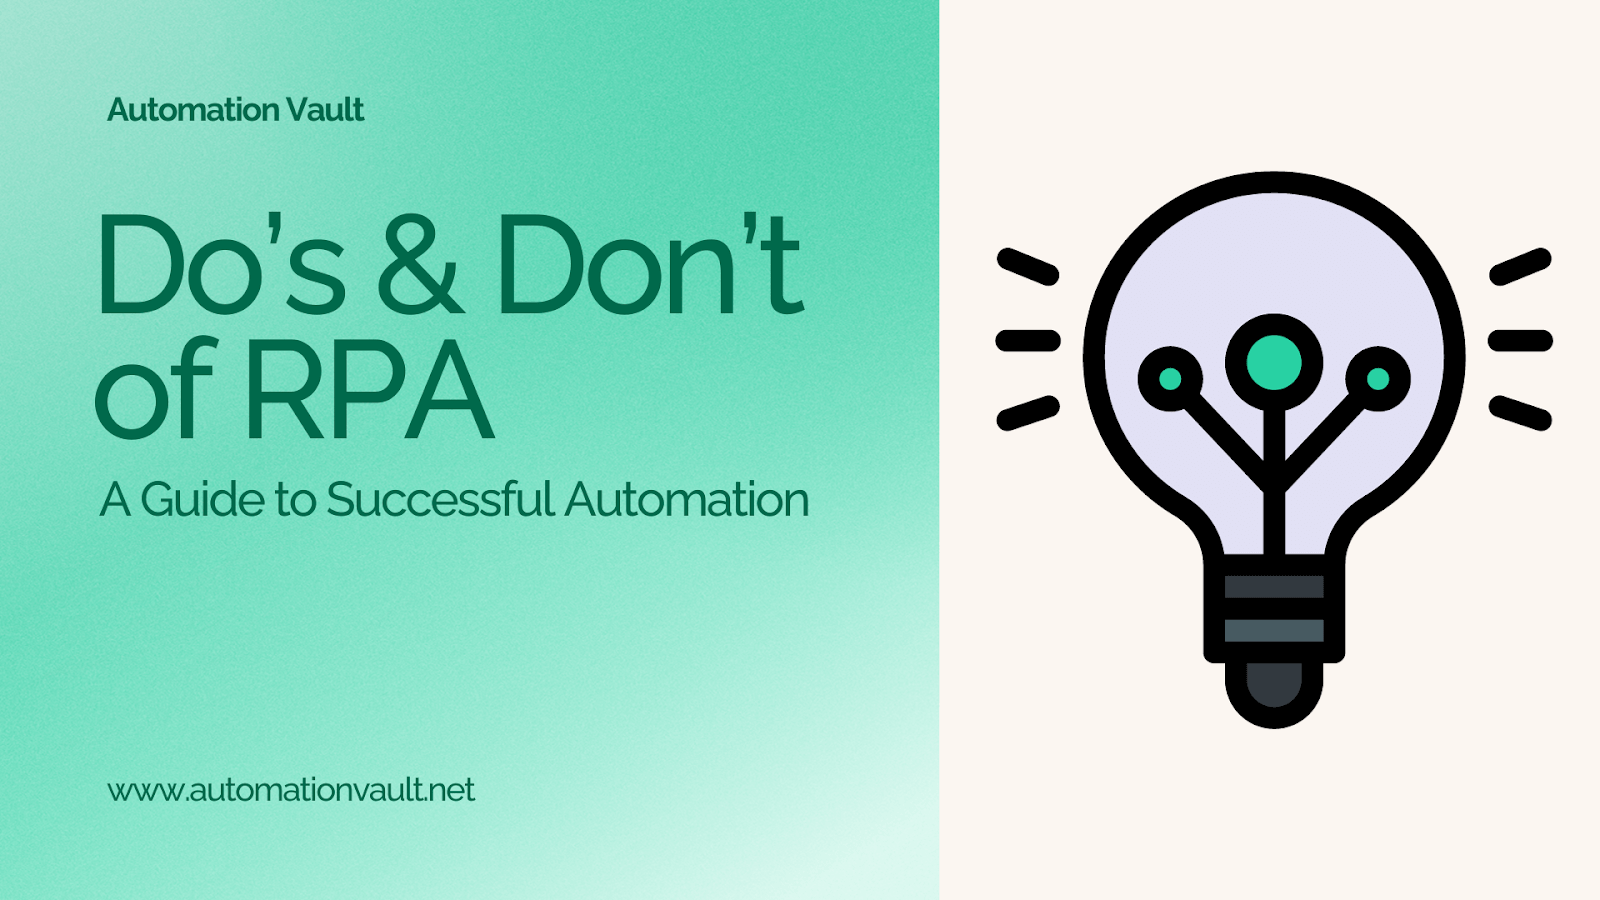 Do's & Don'ts of RPA: A Guide to Successful Automation